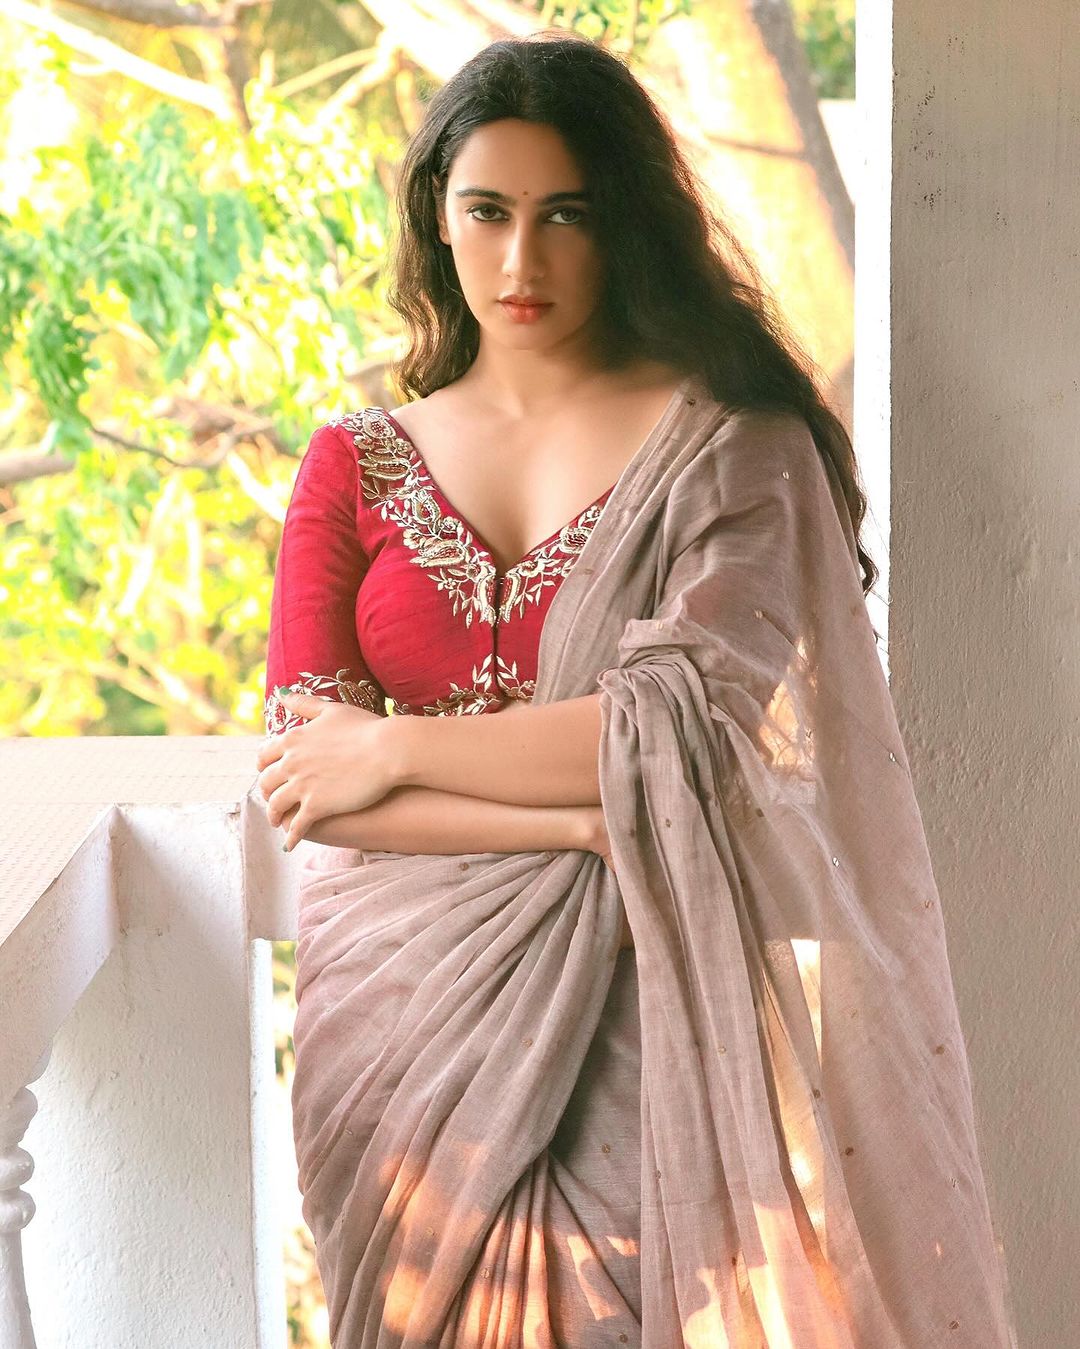 Megha Shukla Exposes her Sexy back in a Dark-Red Backless Blouse and Saree